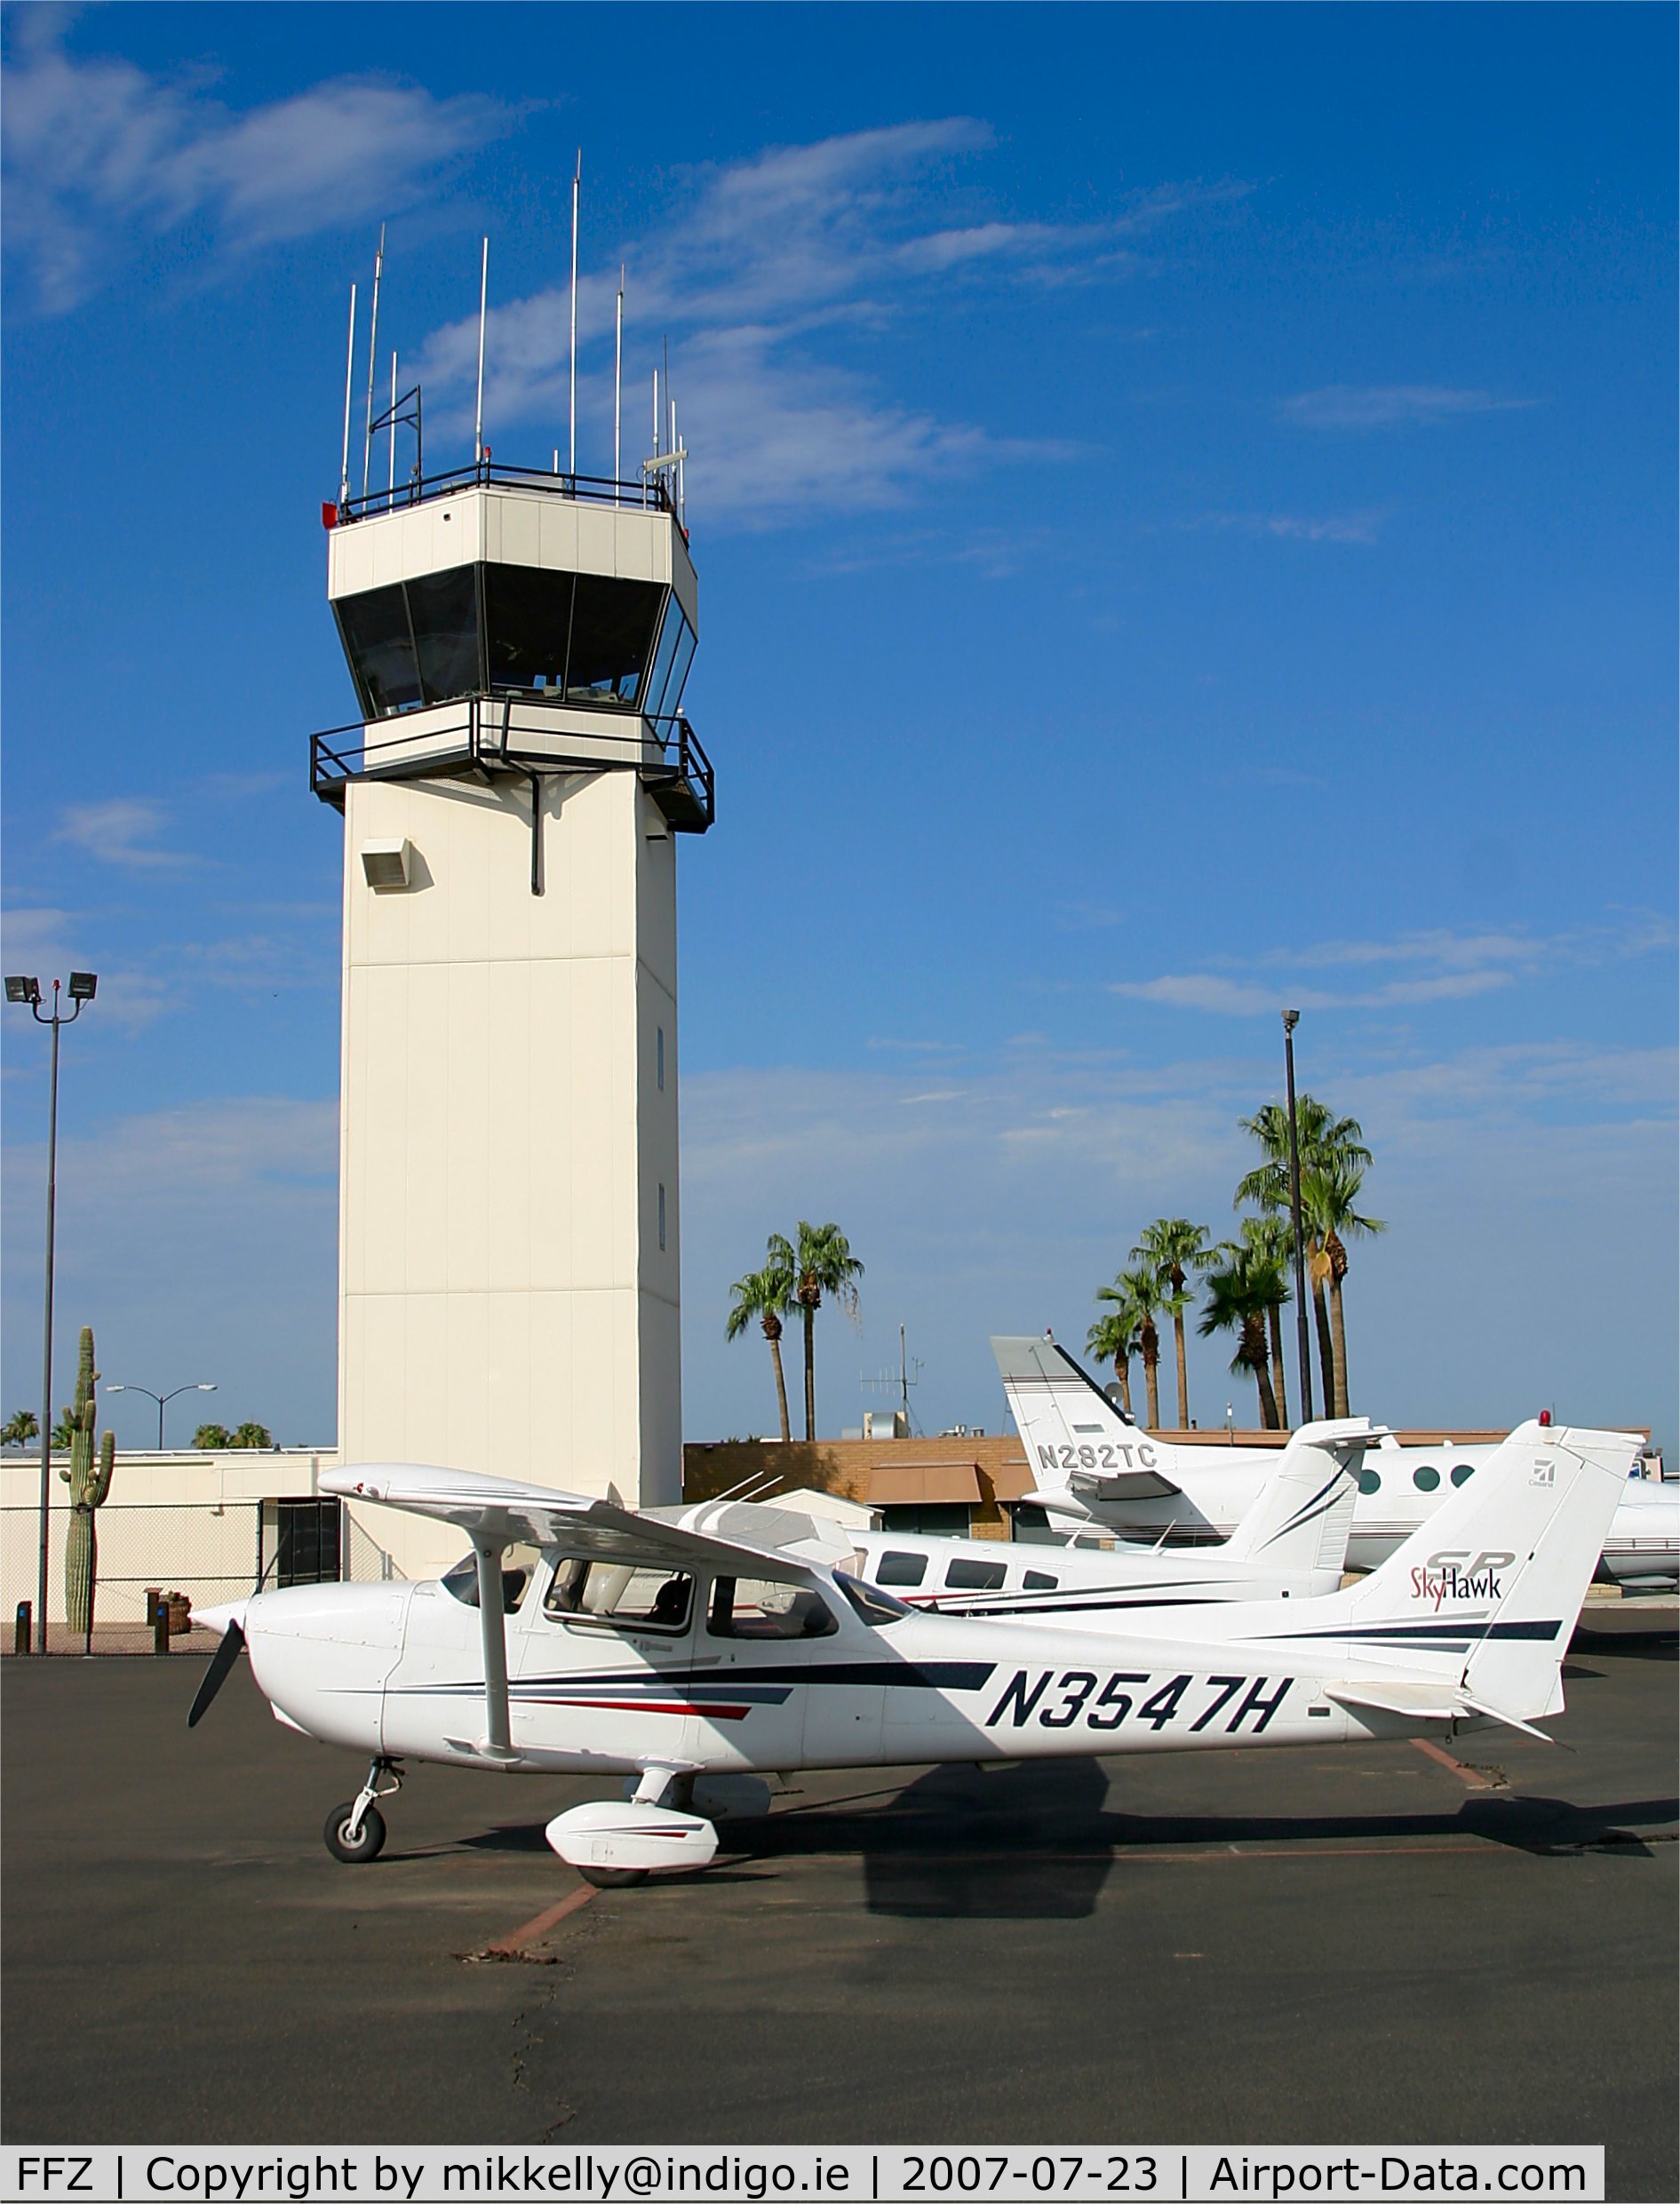 Falcon Fld Airport (FFZ) - Cessna 172 N3547H sits on theMesa ramp in front of the tower